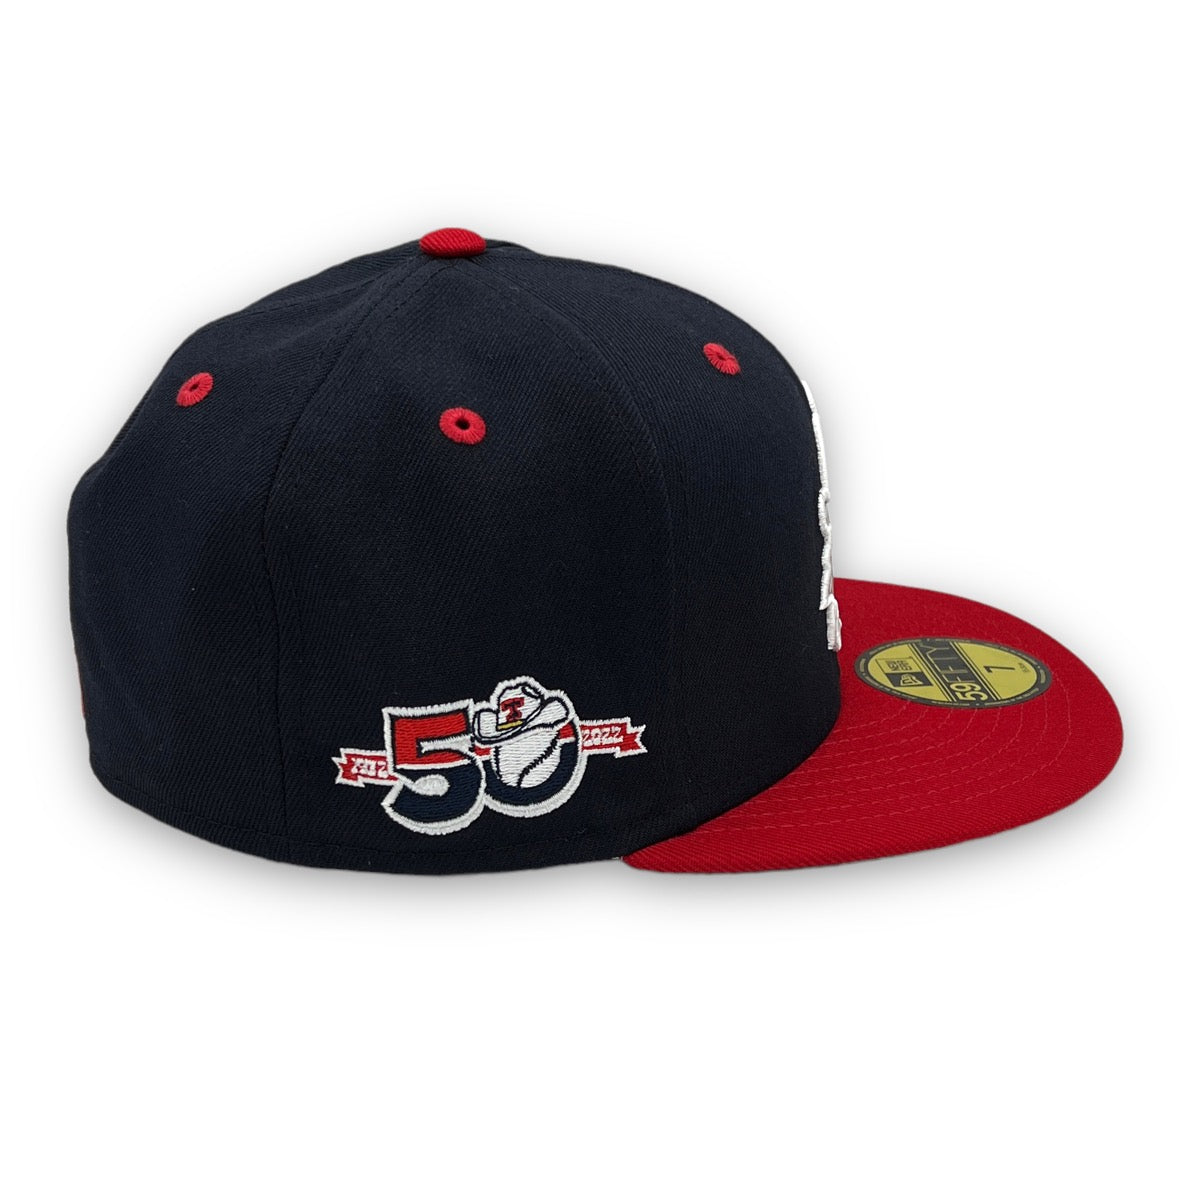 Texas Rangers 1984 5950 Fitted Cap 8